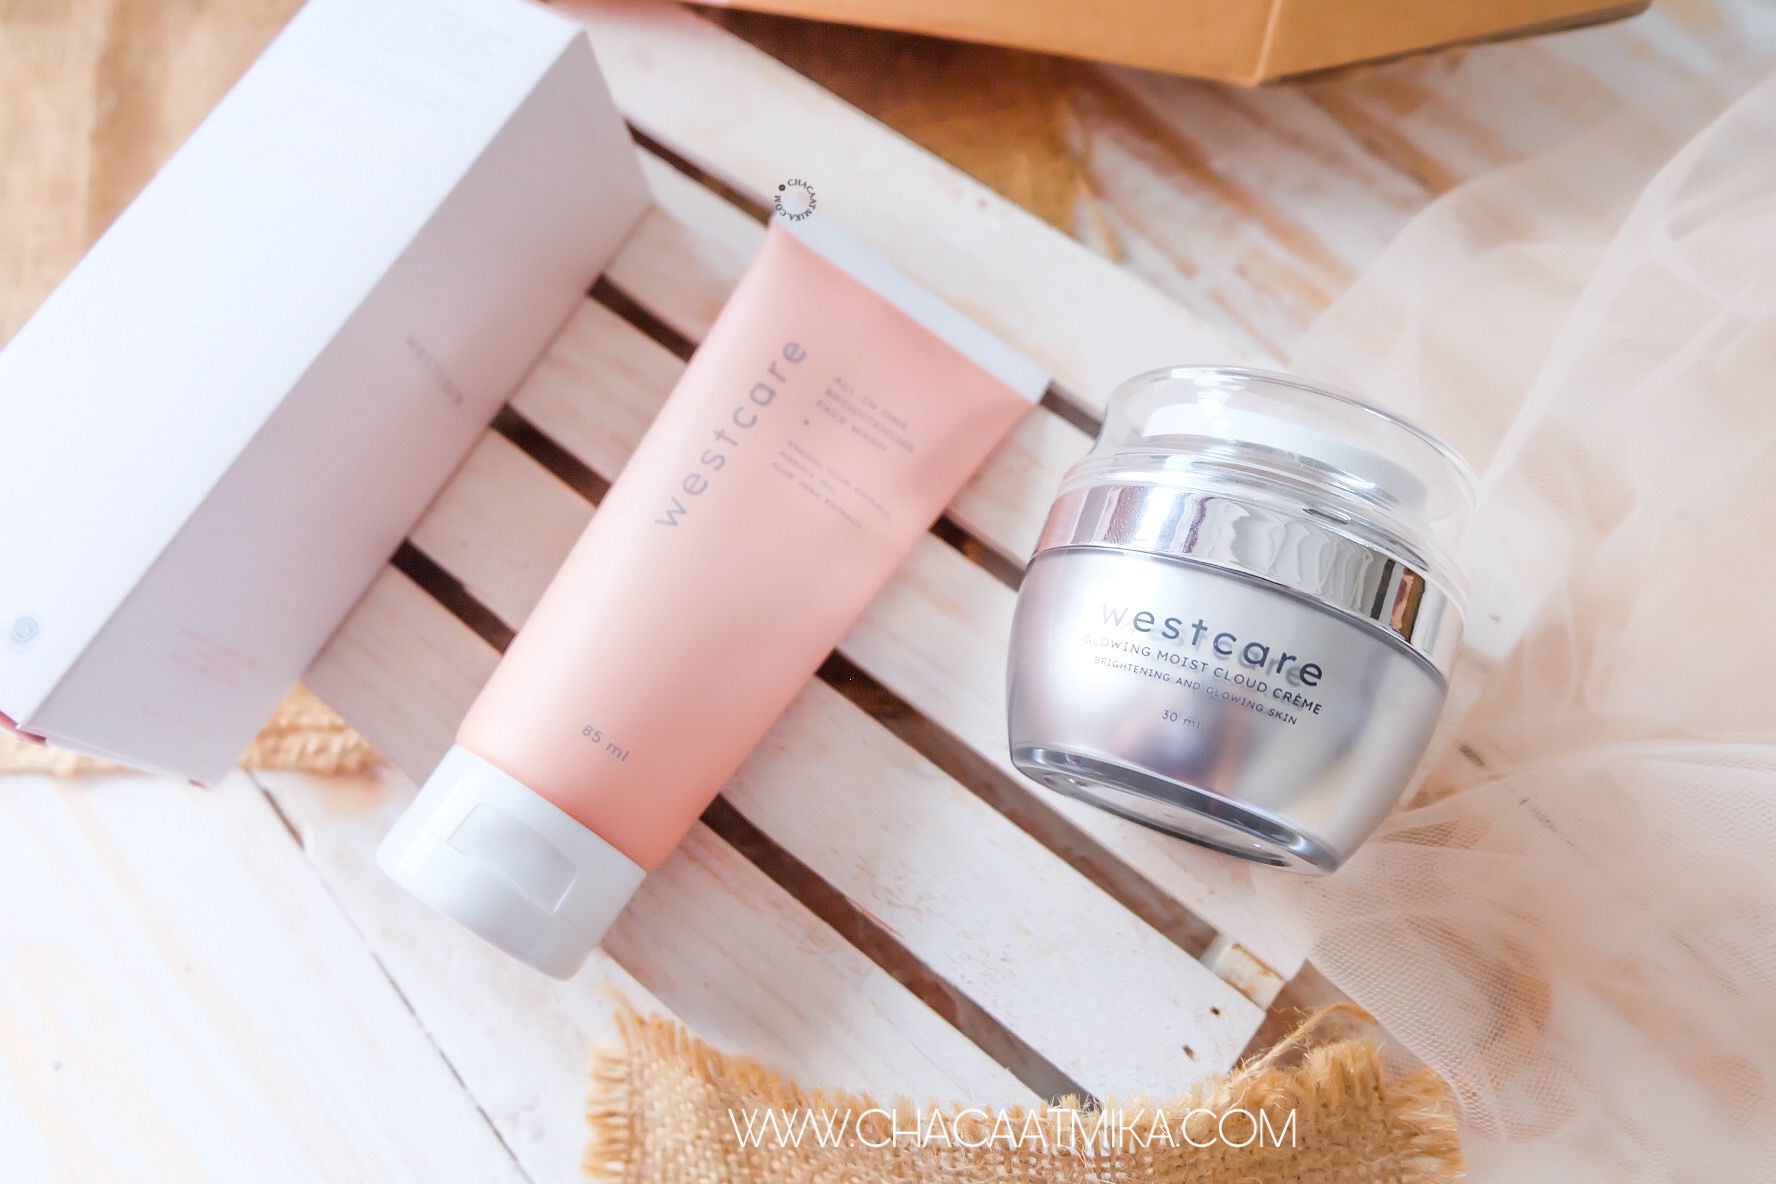 Review: Westcare All in One Brightening Facewash dan Westcare Glowing Moist Cloud Creme